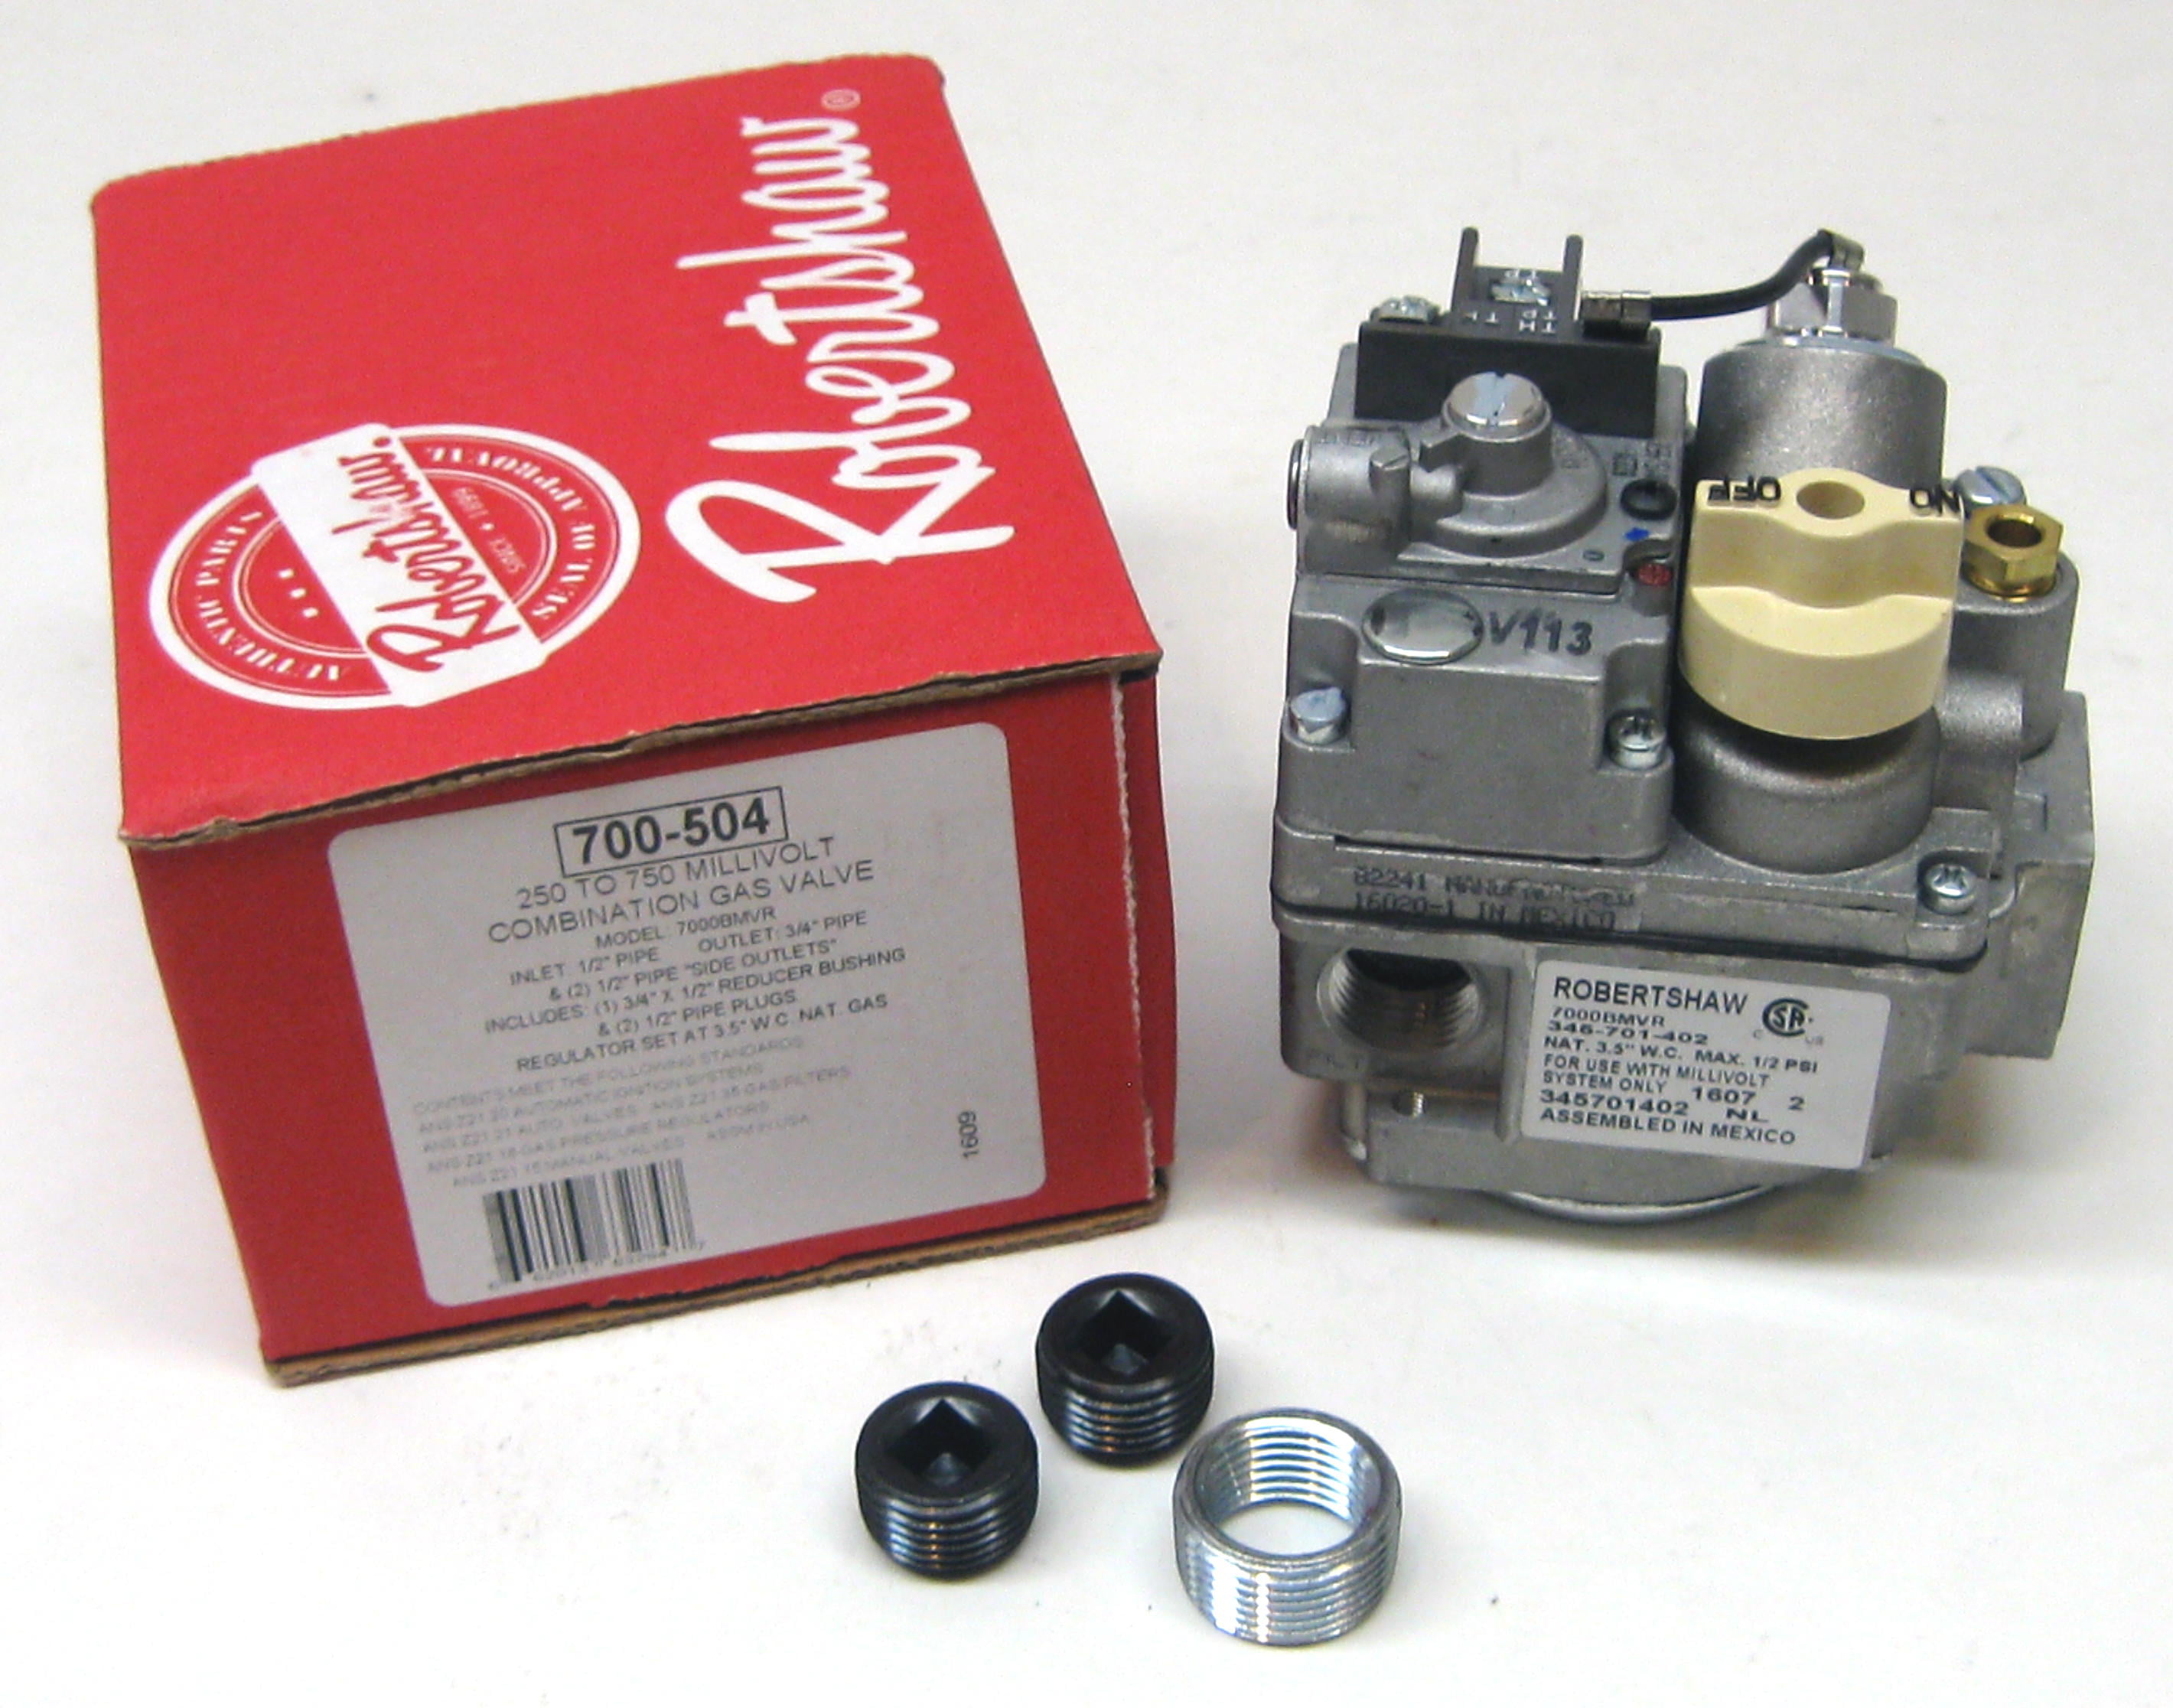 NAT ANETS P8903-42 GAS CONTROL-700 SAFETY VALVE BAKERS PRIDE R3104X 